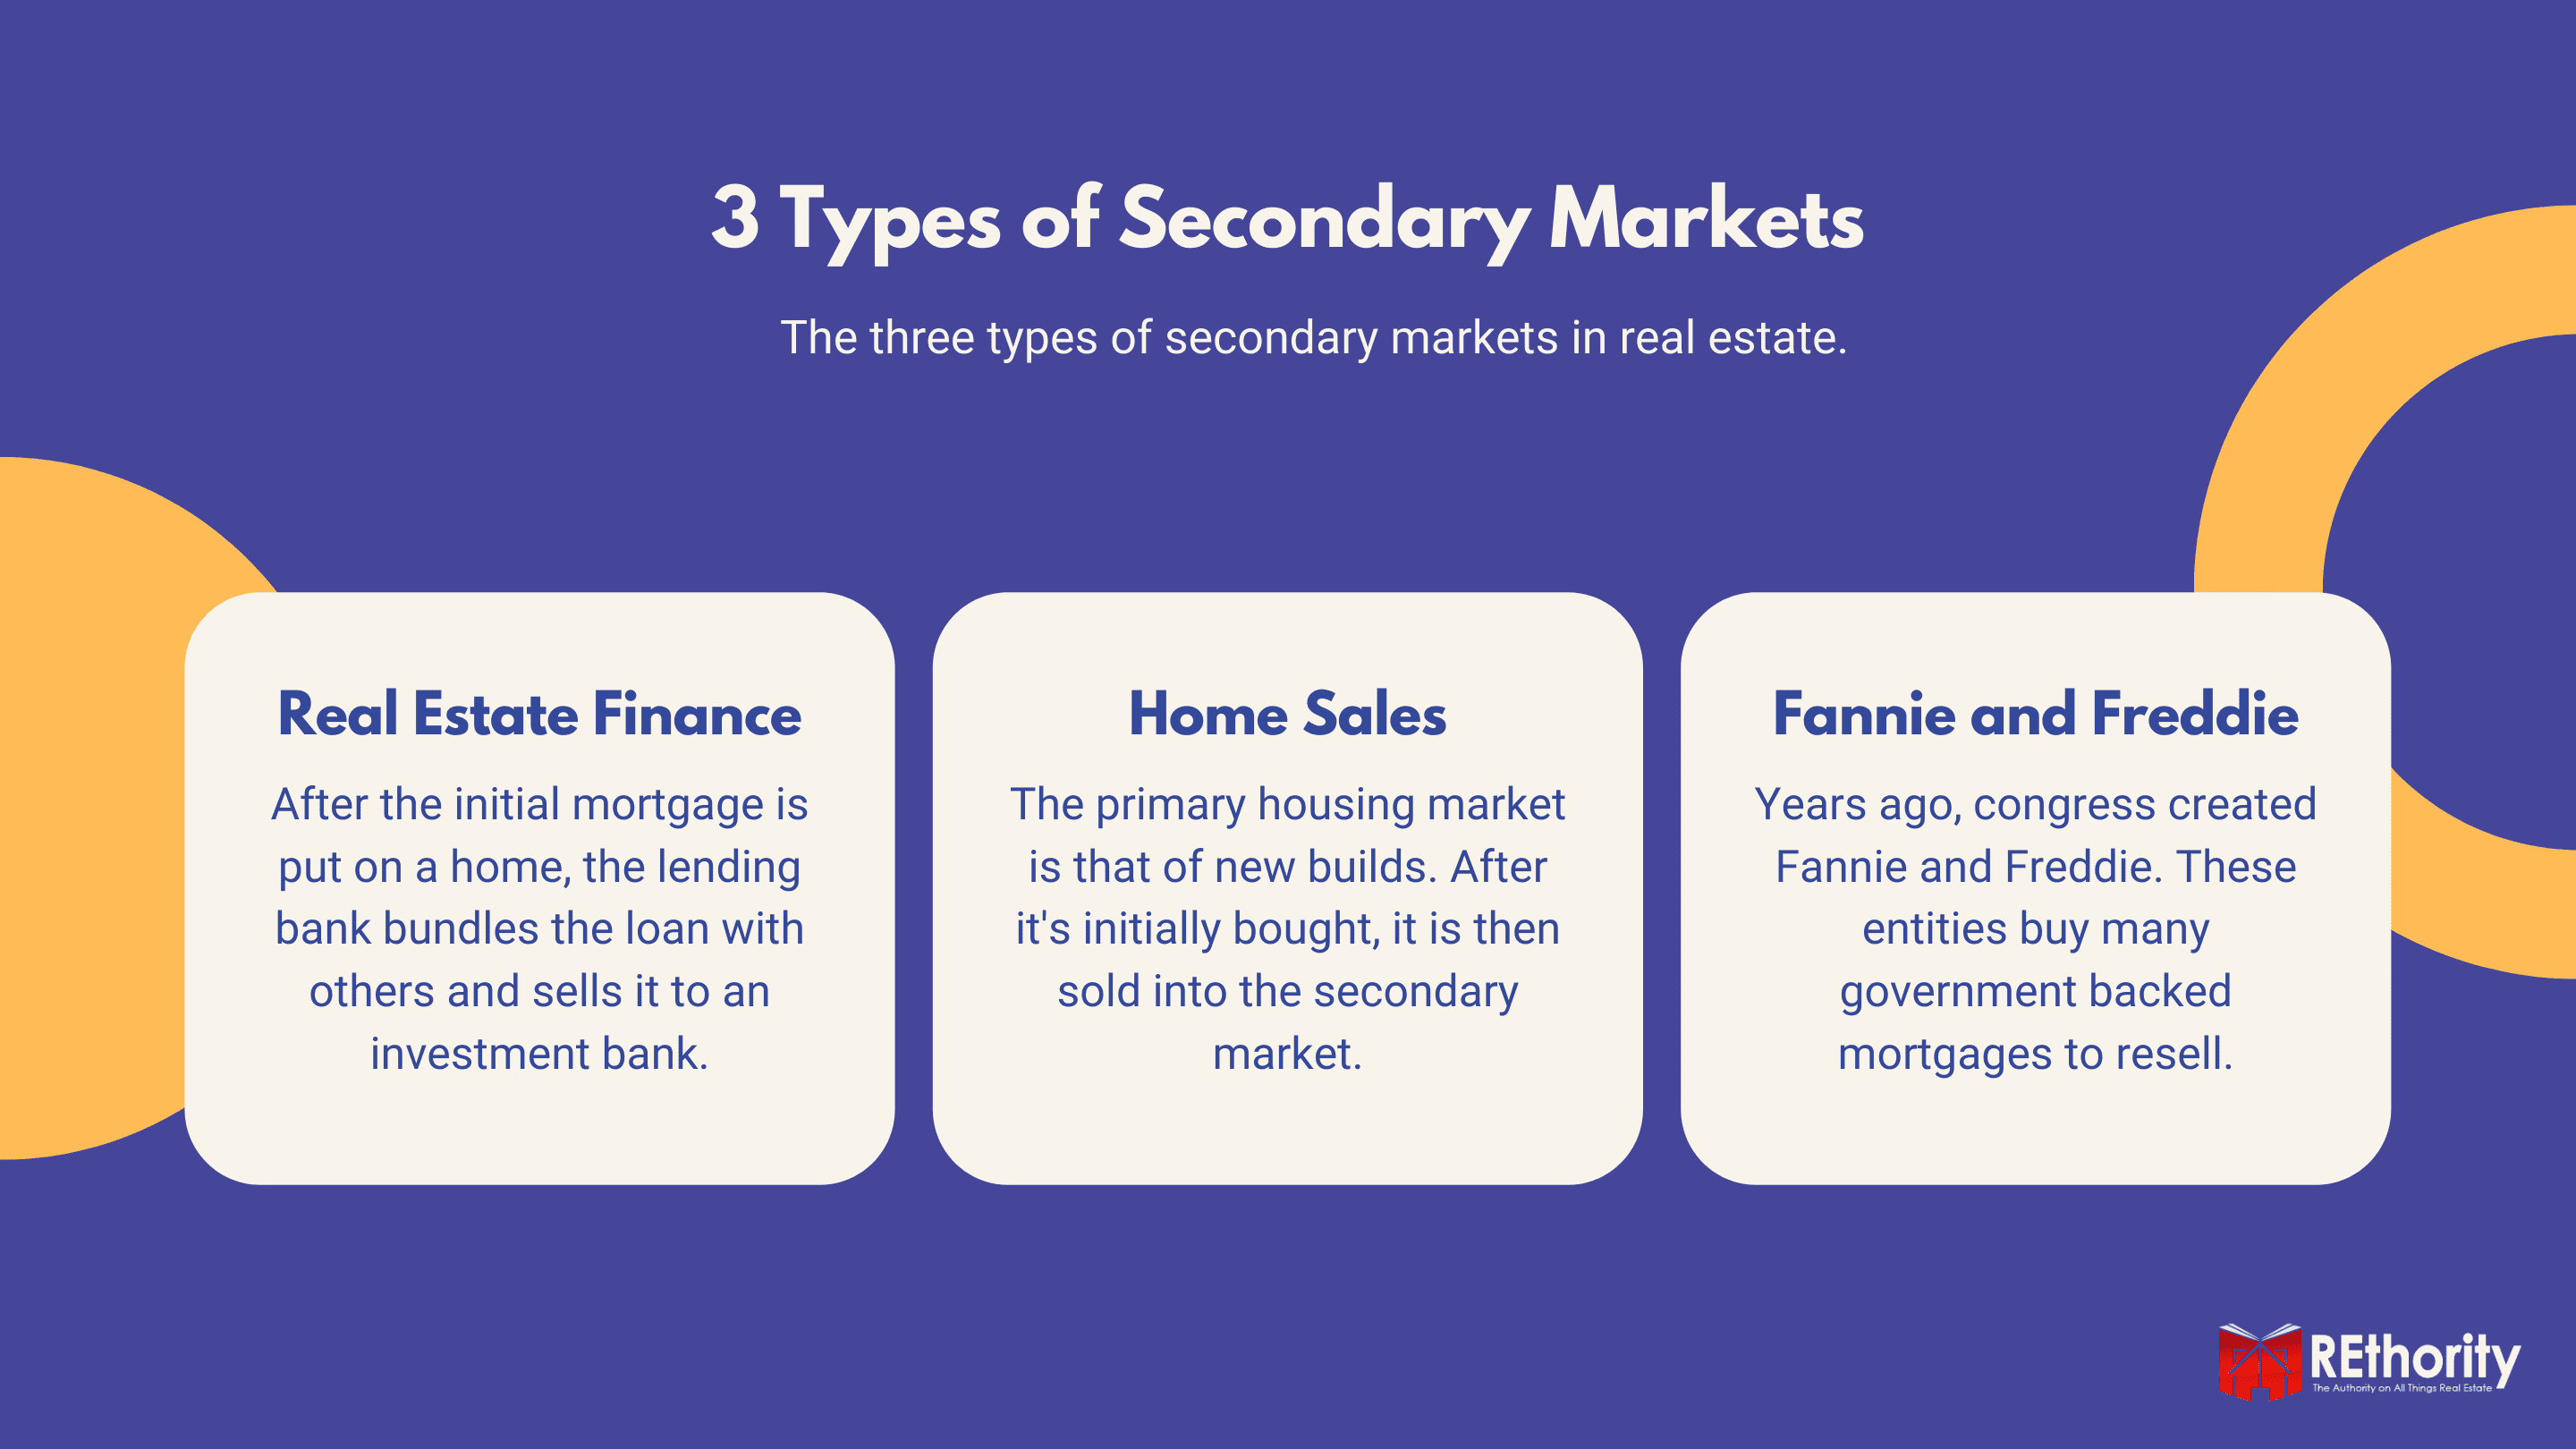 Three types of secondary markets including real estate finance, Fannie and Freddie, and Home Sales.